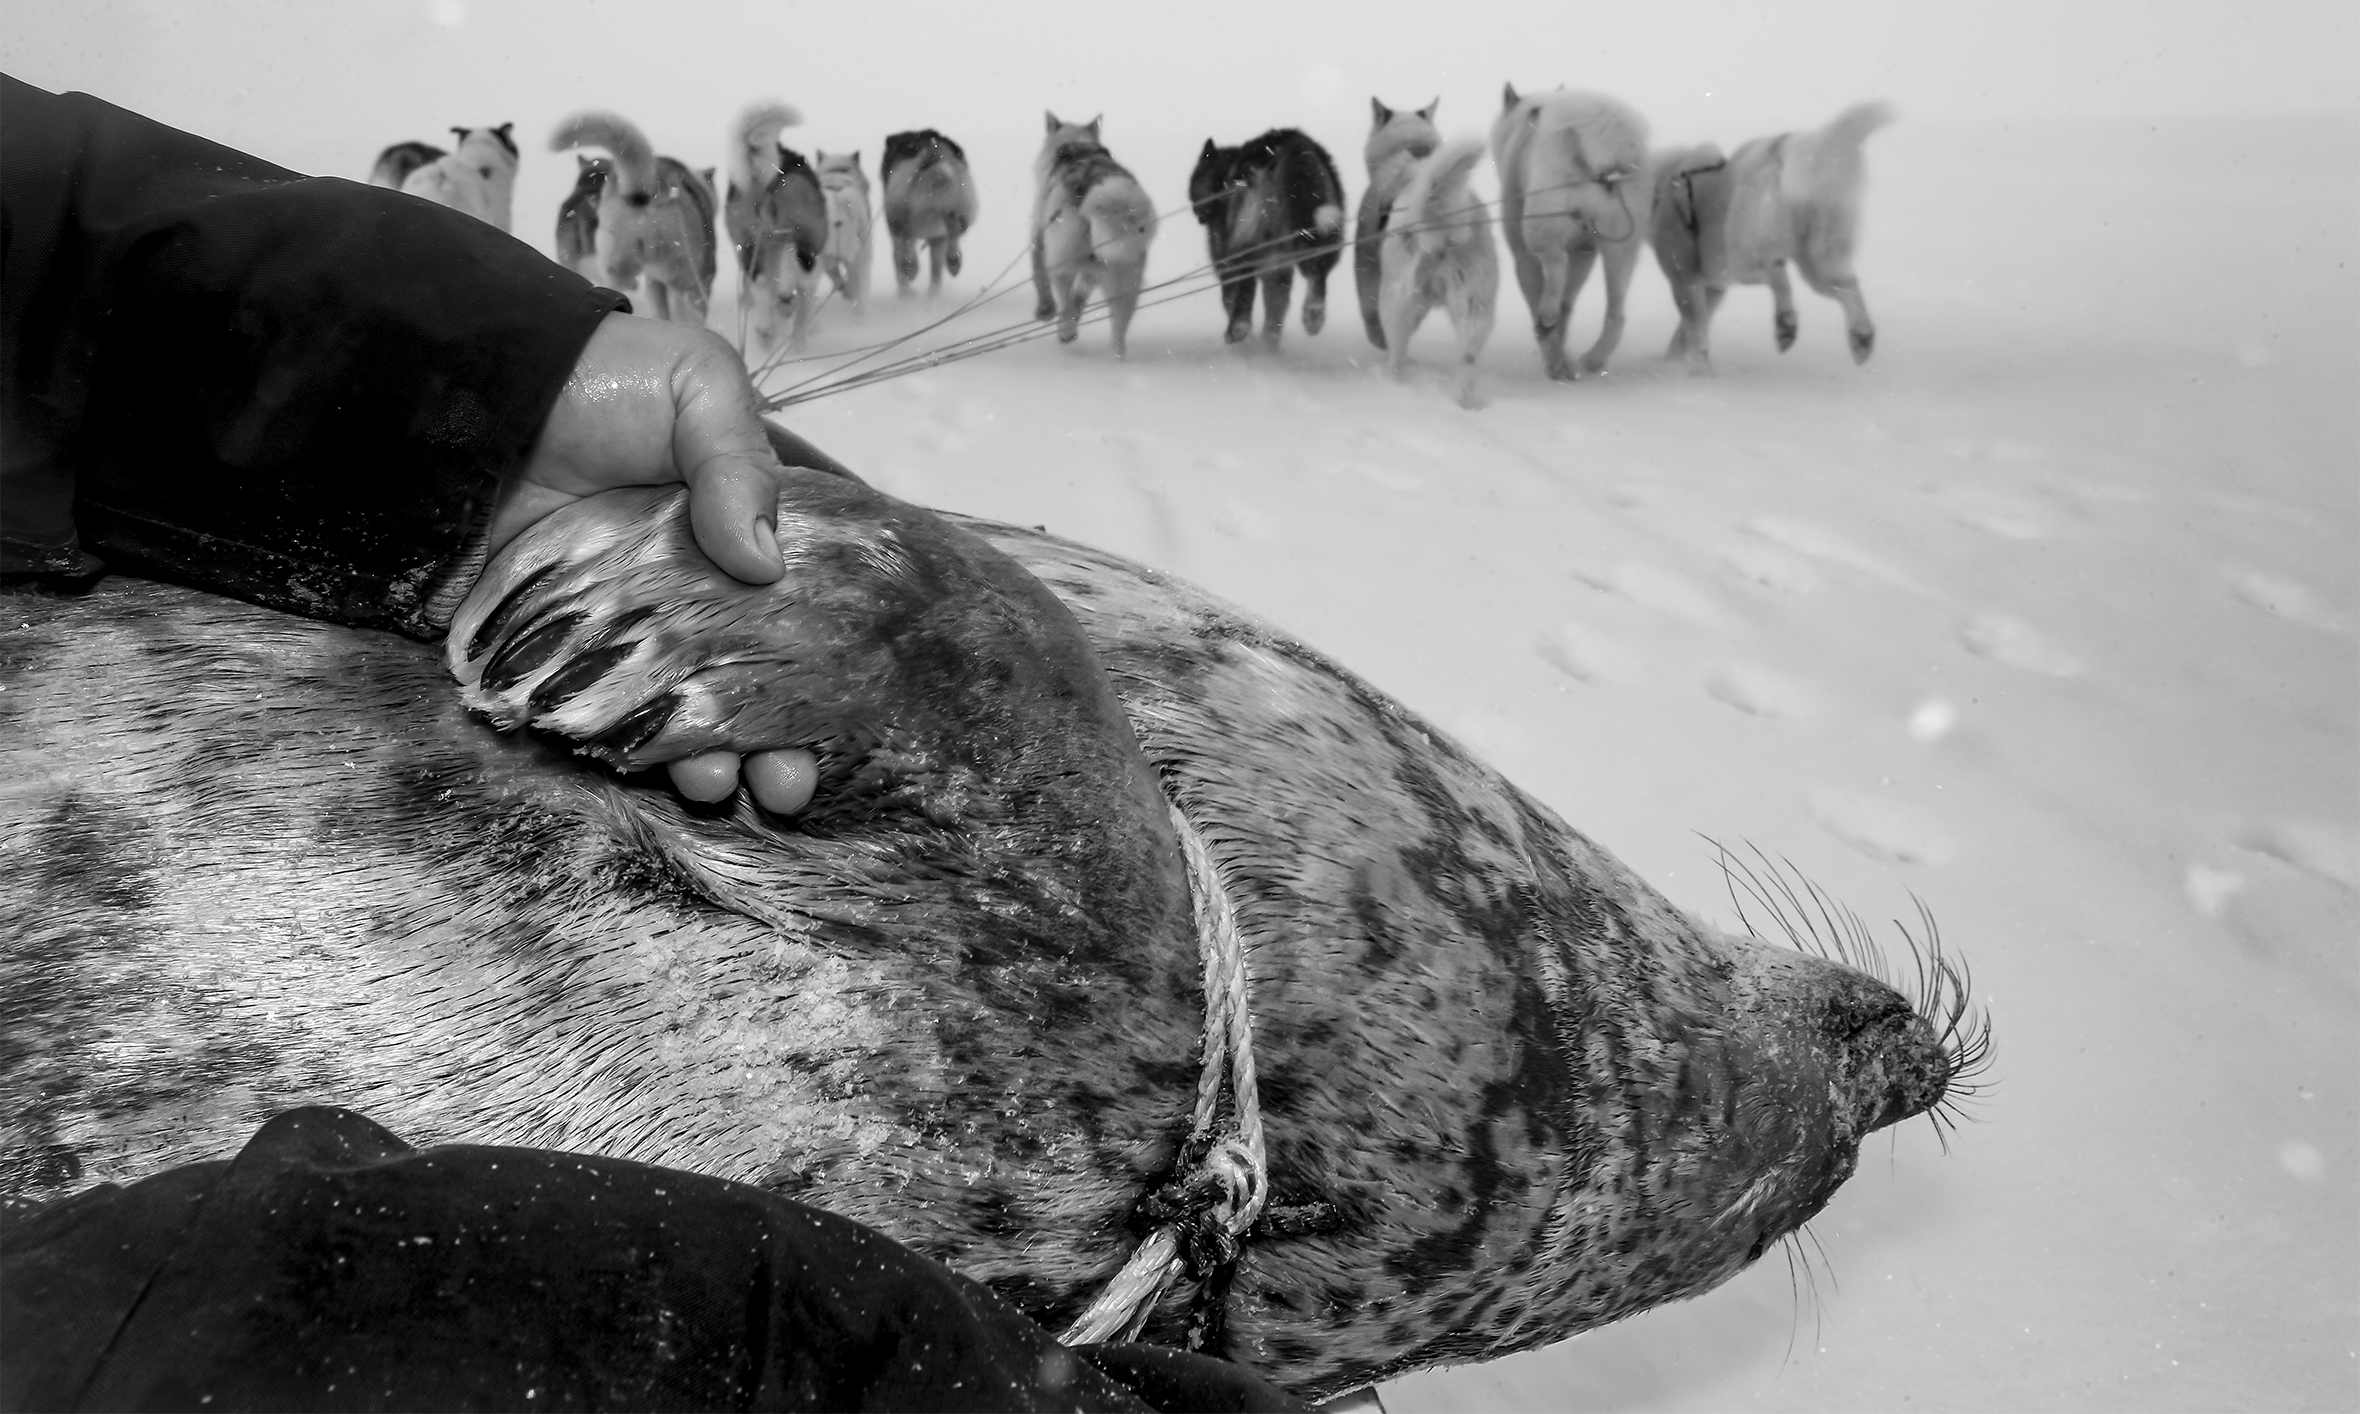 A dogsled team of at least 12 dogs pull a seal hunter and the body of a ringed seal to camp. A hunter’s hand holds one of the seal’s foreflippers. The seal is tied belly-up, so the dark, catlike whiskers on its snout are easily seen against the snow.